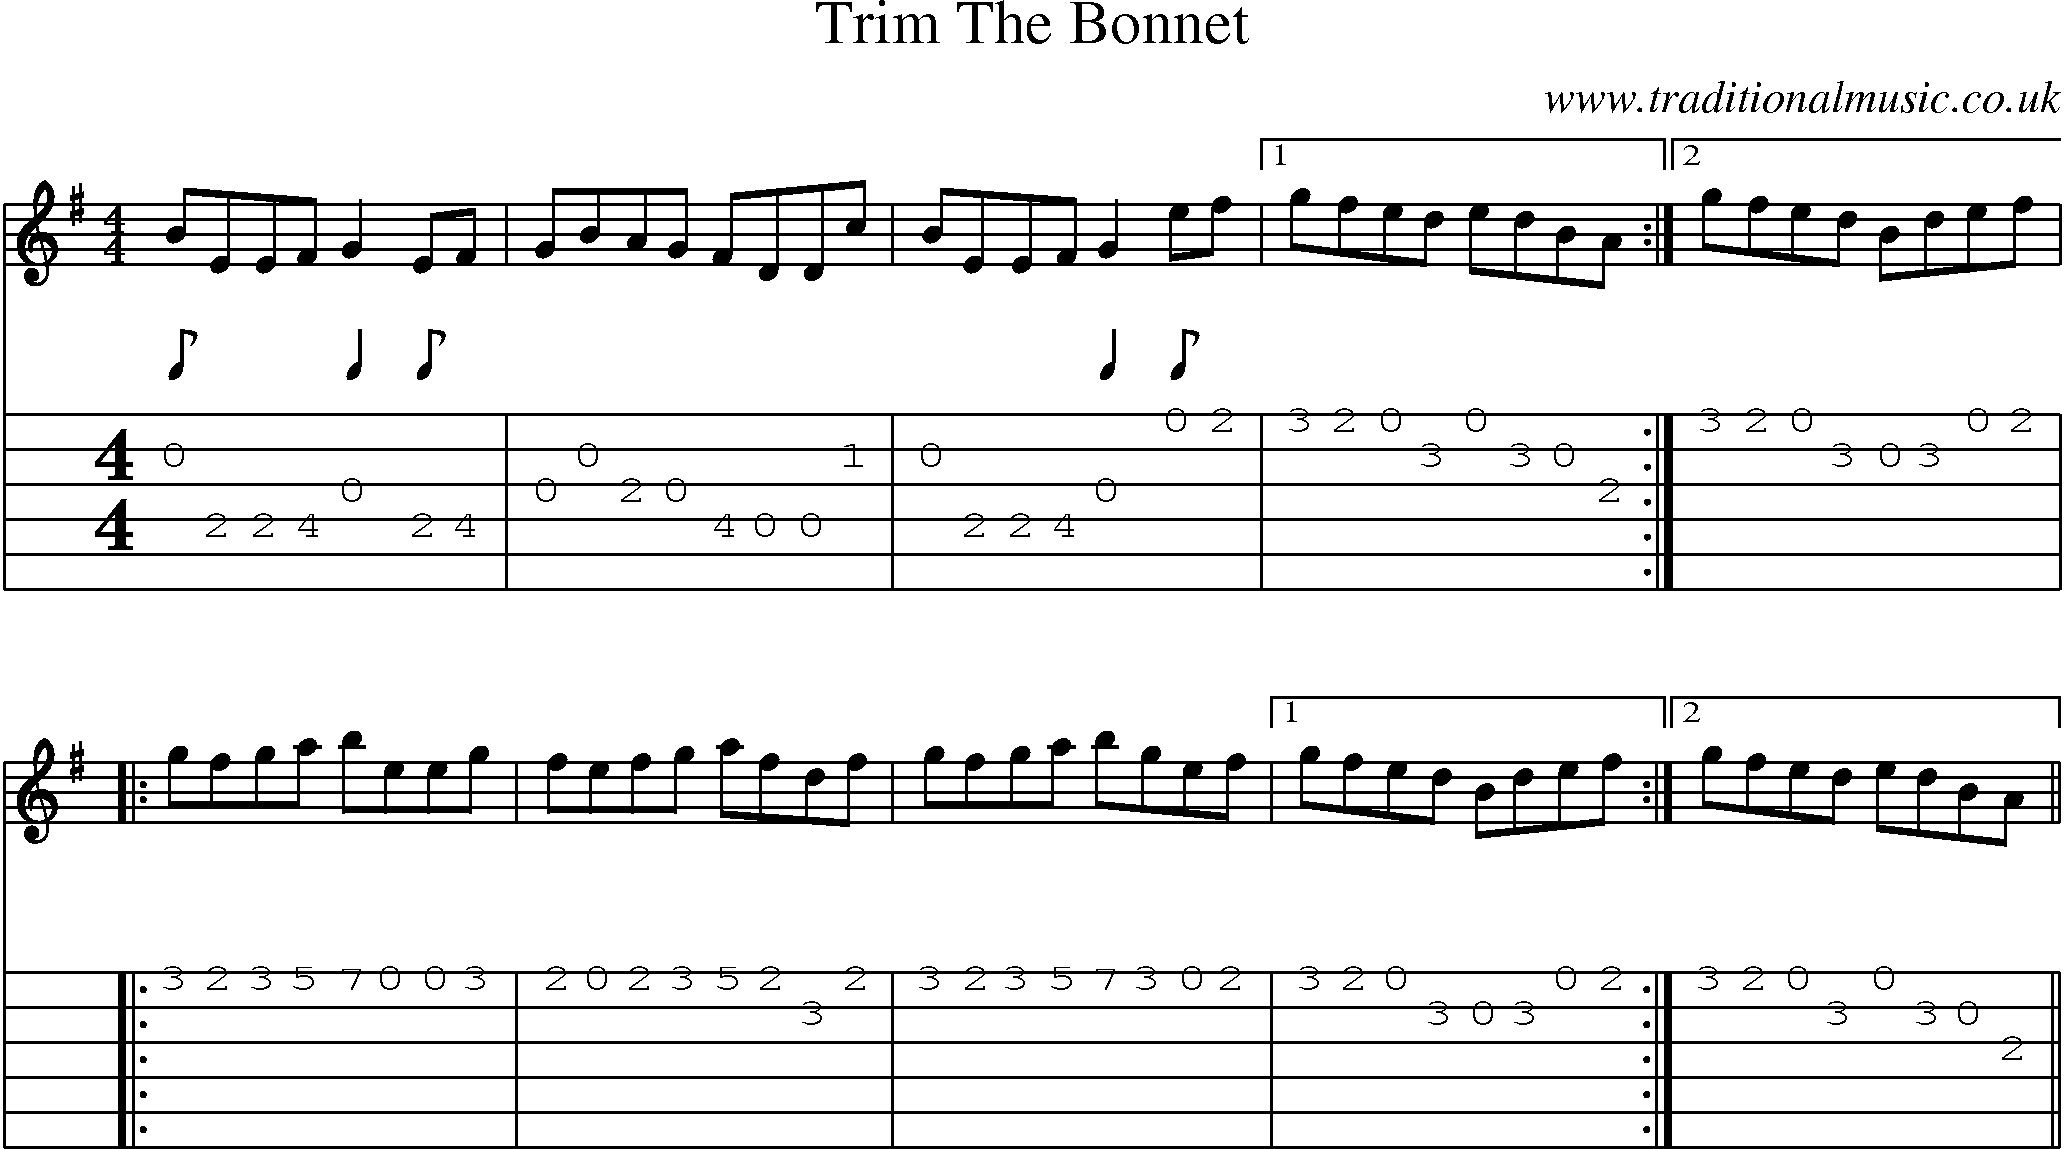 Music Score and Guitar Tabs for Trim Bonnet